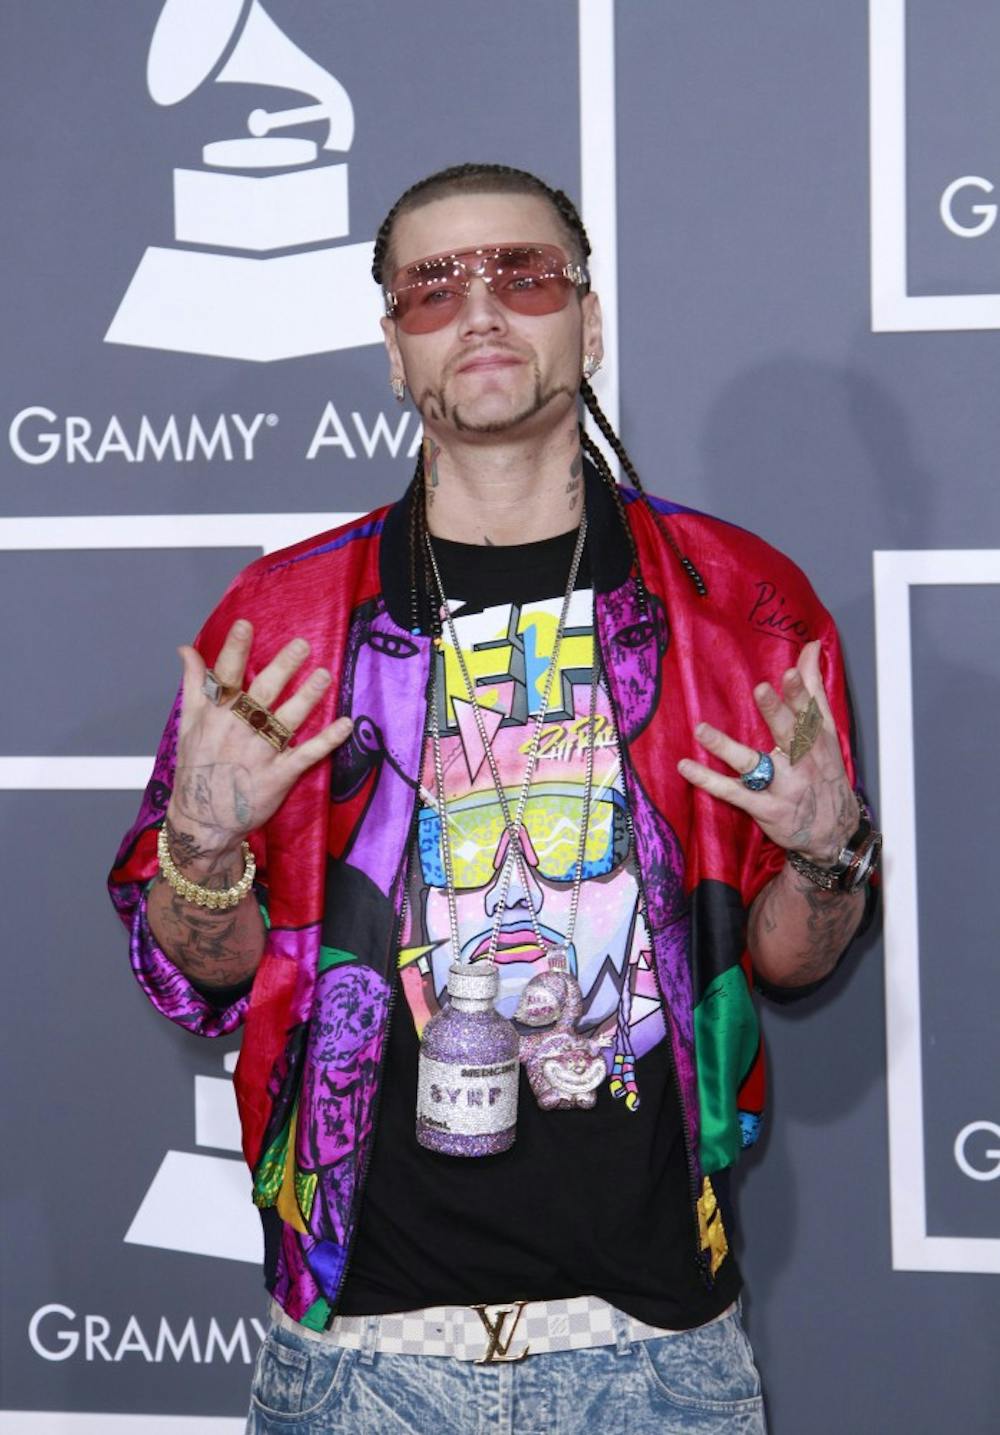 Riff Raff arrives for the 55th Annual Grammy Awards at Staples Center in Los Angeles, California, on Sunday, February 10, 2013. (Kirk McKoy/Los Angeles Times/MCT)